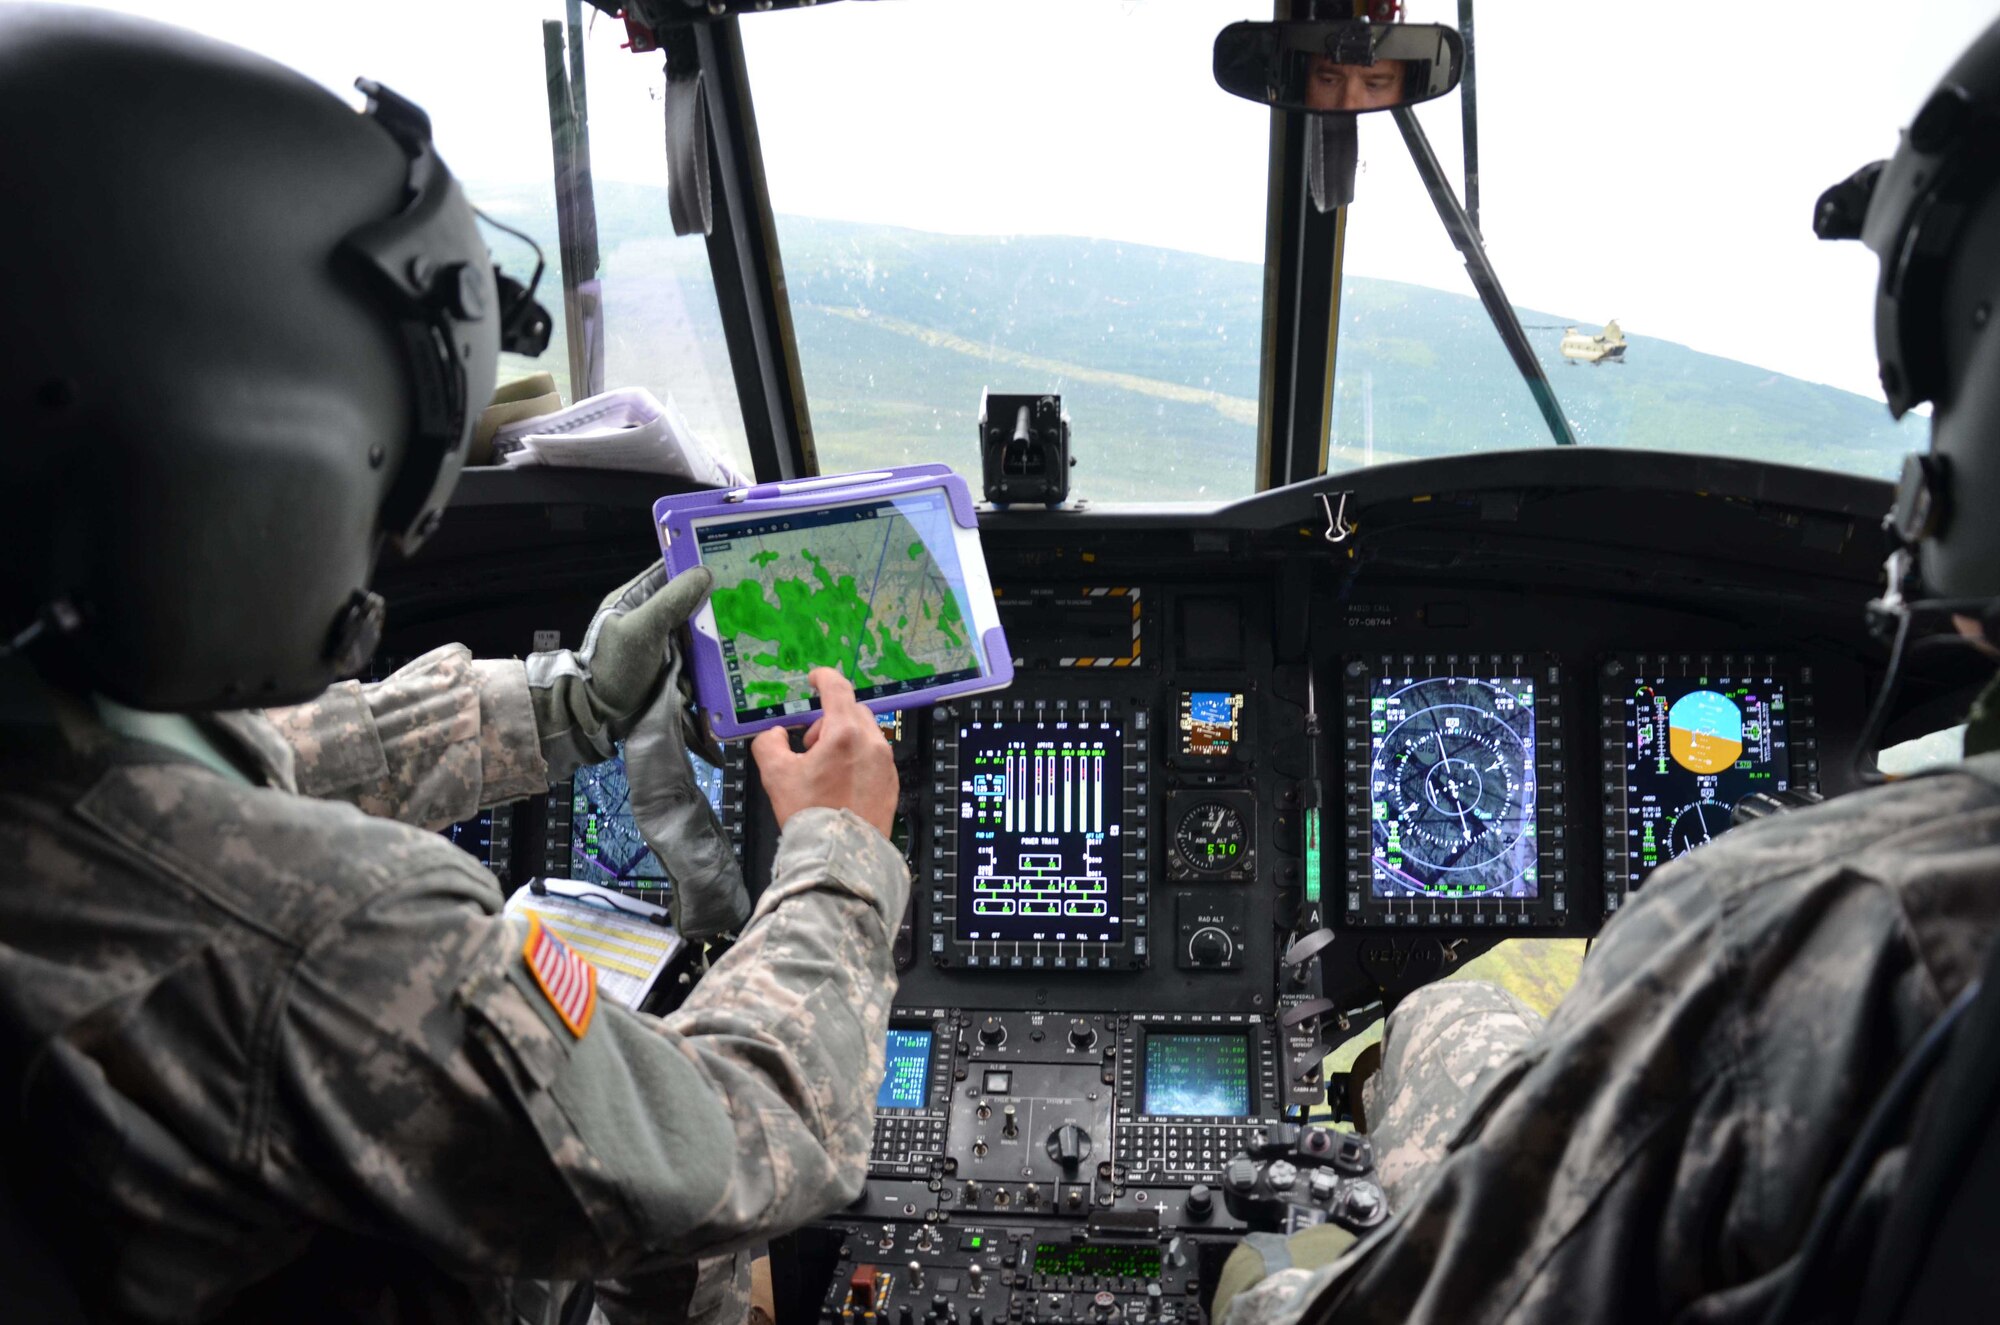 Chief Warrant Officer 3 Rafael Caldeira (left) uses a tablet to show current weather conditions to fellow pilot Chief Warrant Officer 4 Dave Lawson, as the two Soldiers fly their CH-47 Chinook from Ft. Wainwright, Alaska, 60 miles north of the Arctic Circle July 24, 2015.  The crew was part of the mission to relocate radiologic material belonging to the Air Force Technical Applications Center from Burnt Mountain to the Nevada National Security Site for permanent disposal.  (U.S. Air Force photo by Susan A. Romano)